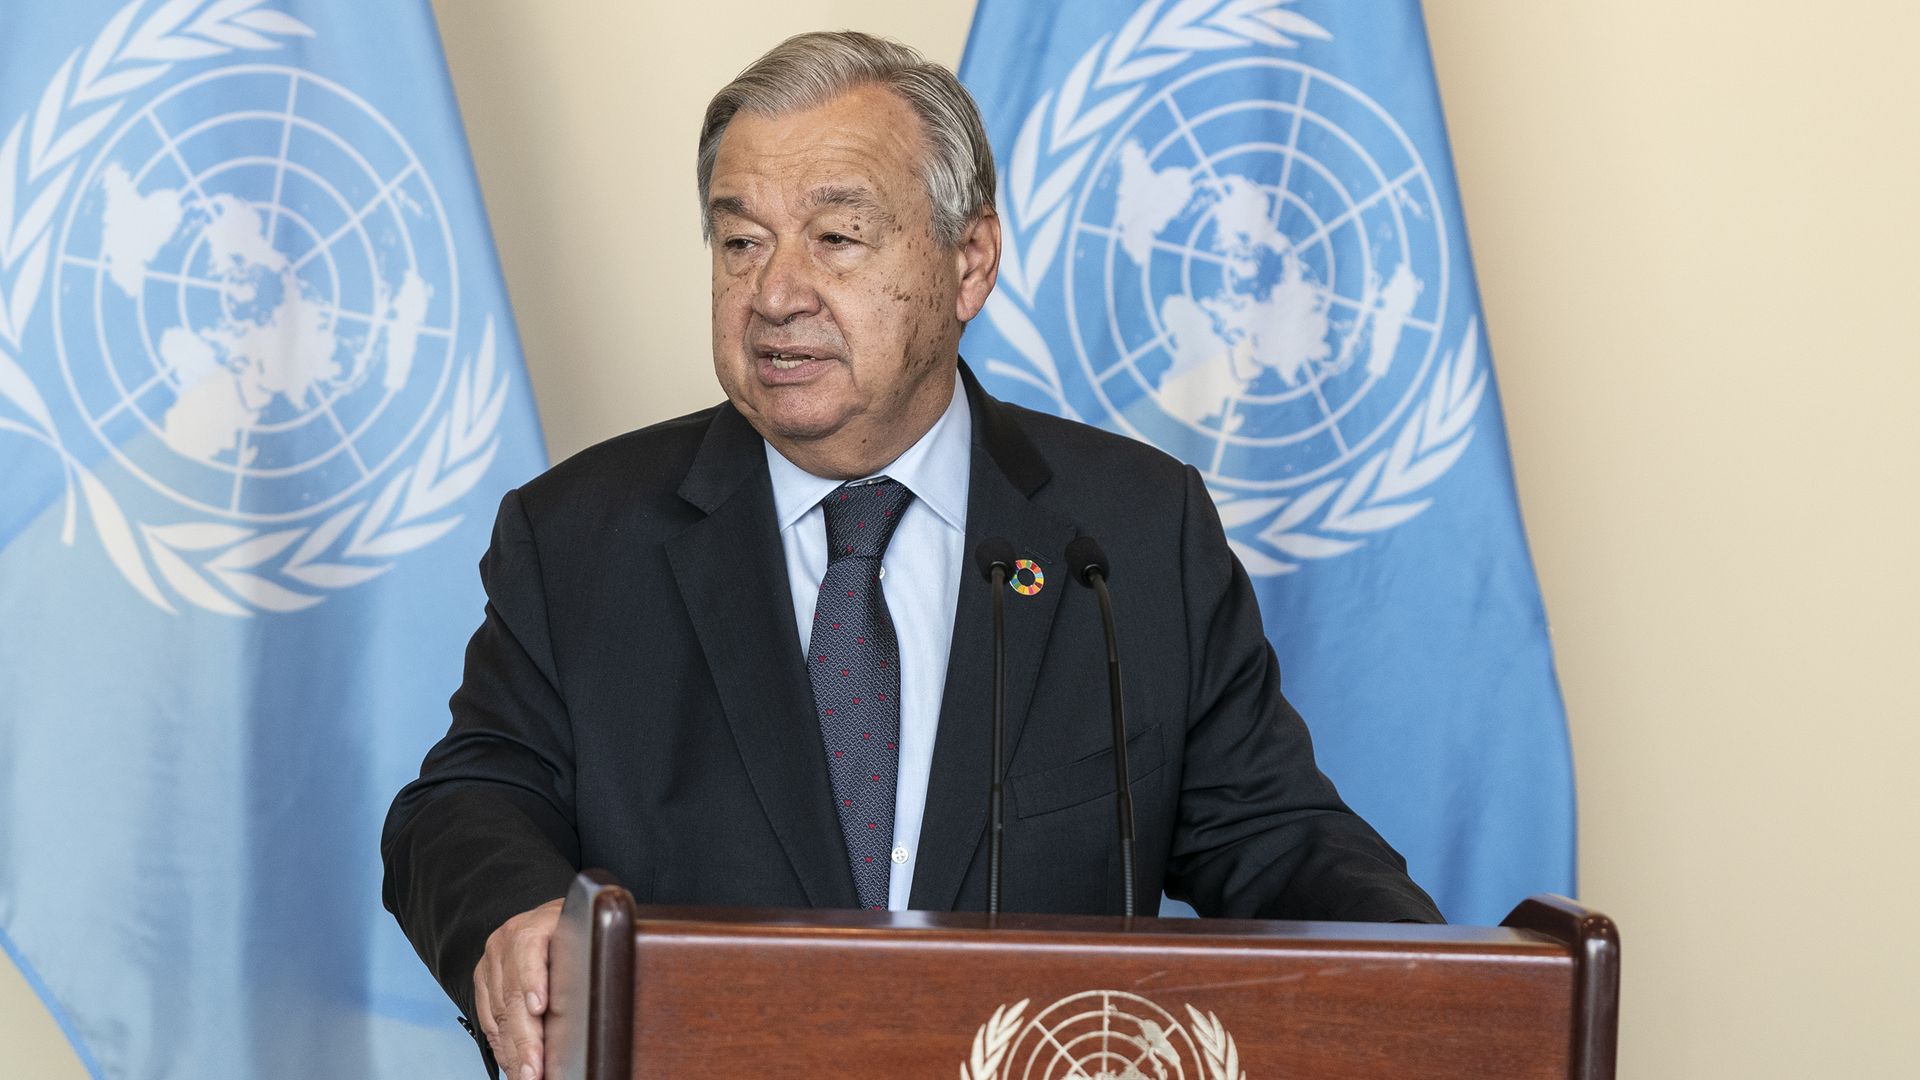 UN Secretary-General Antonio Guterres addresses the media on the Informal Leaders Roundtable on Climate Action at UN Headquarters.